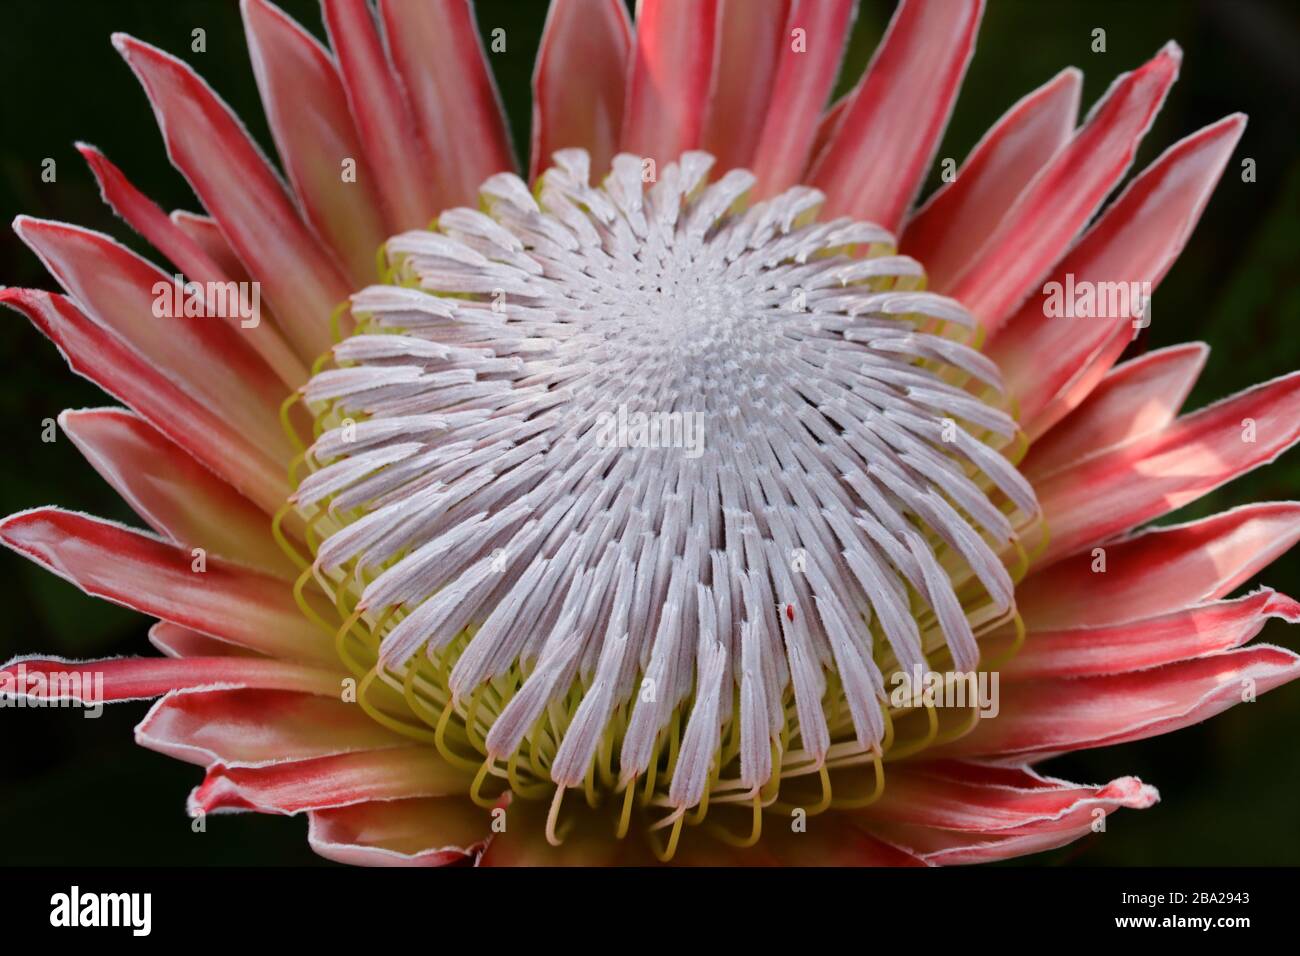 Protea cynaroides, the king protea, is a flowering plant. It is a distinctive member of Protea, having the largest flower head in the genus. Stock Photo